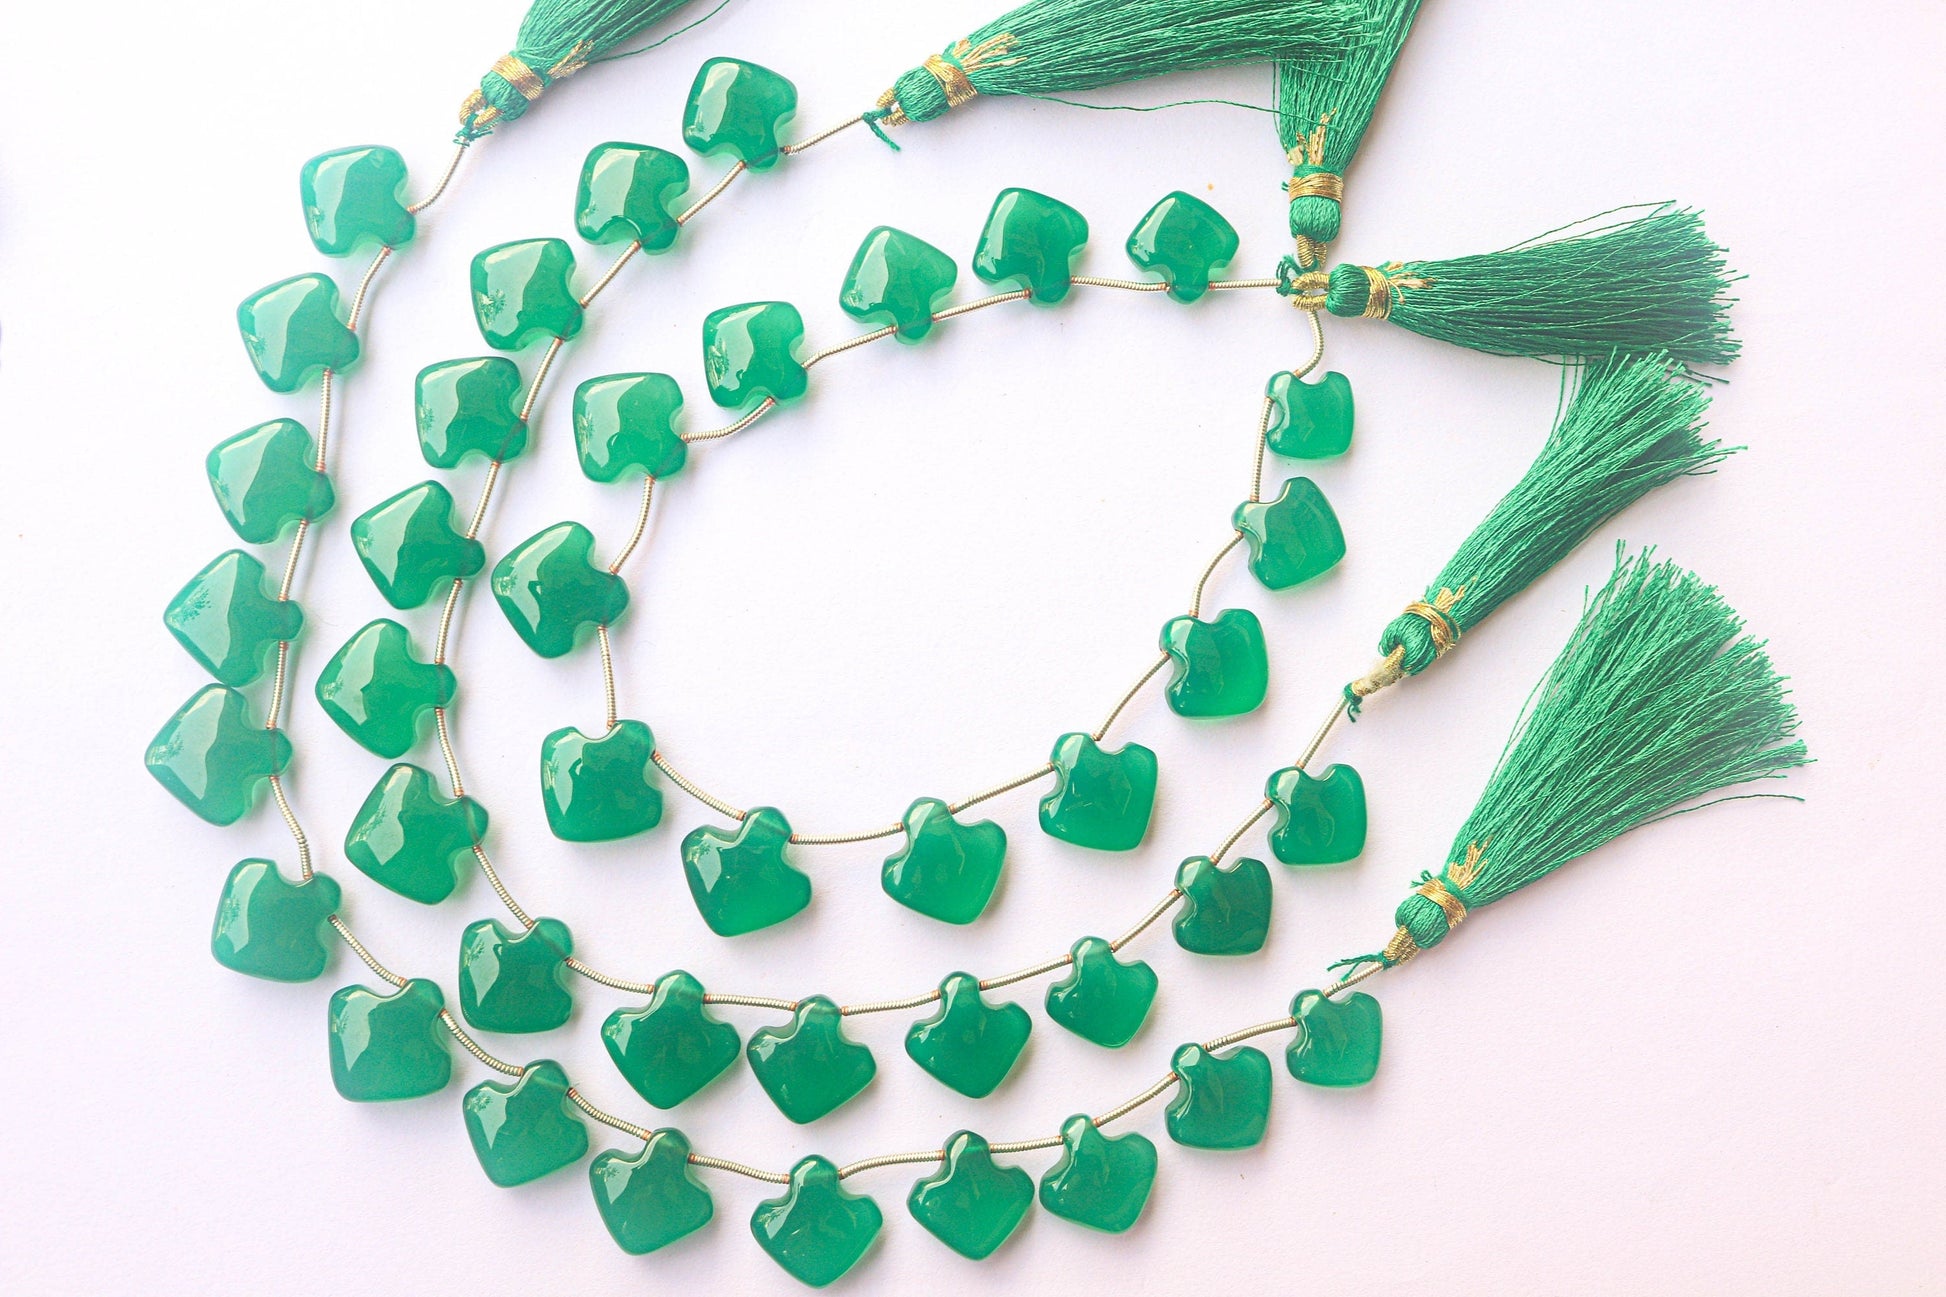 Green Onyx Fancy Shape Briolette Beads | 15x15mm | 13 Pieces | 9 inch String | Gemstone Beads for Jewelry making | Beadsforyourjewellery Beadsforyourjewelry